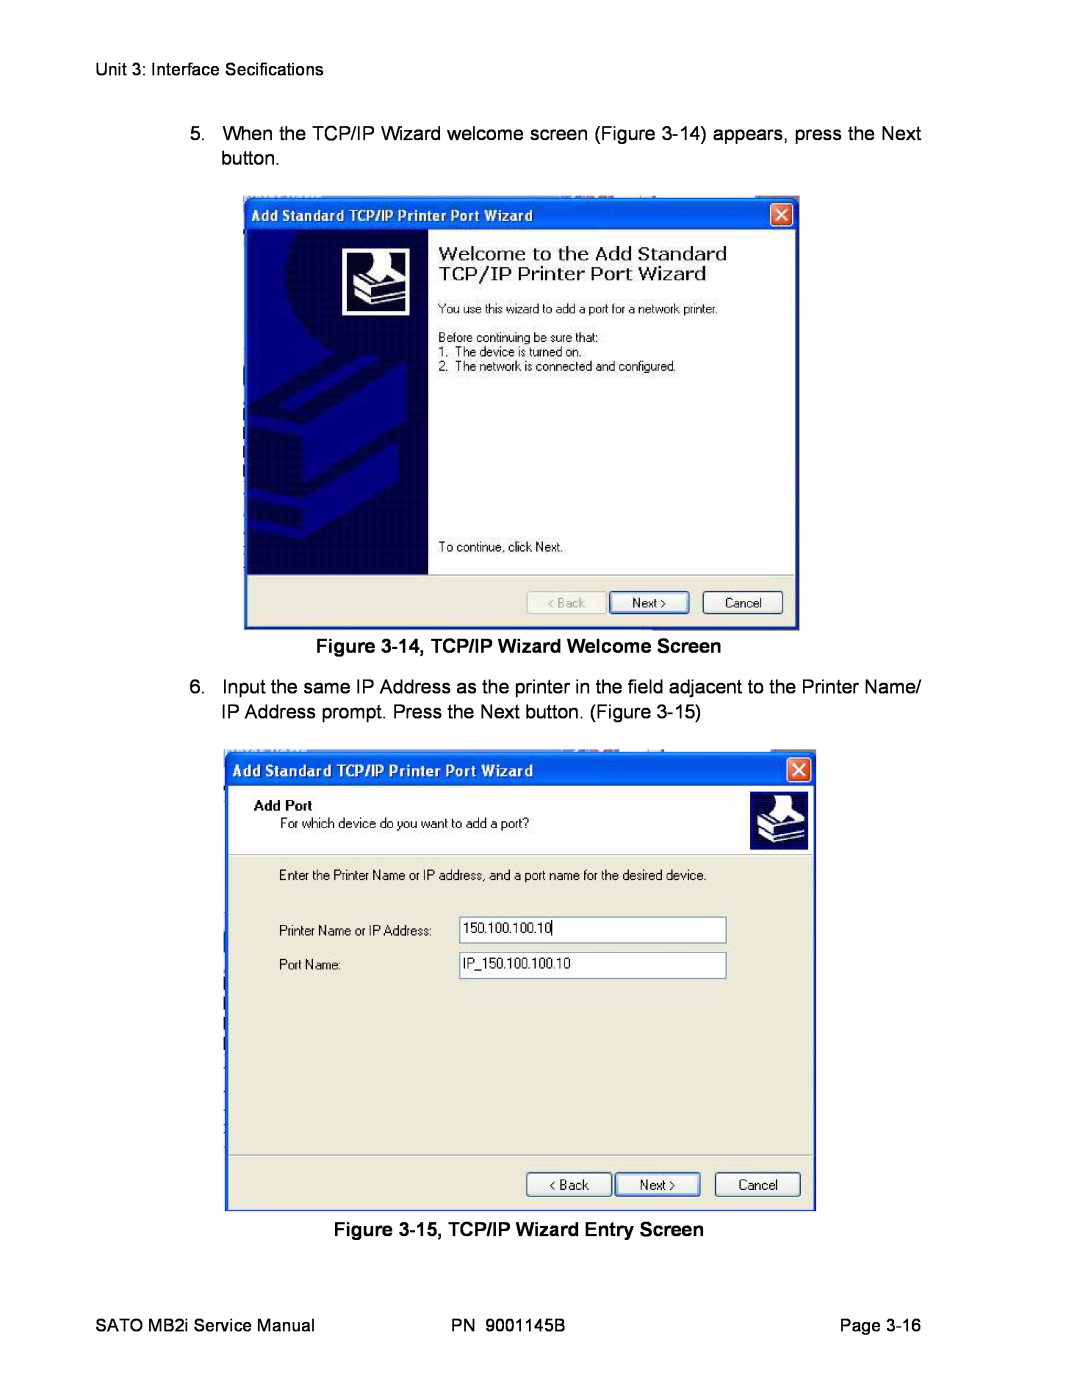 SATO 200i manual 14, TCP/IP Wizard Welcome Screen, 15, TCP/IP Wizard Entry Screen 